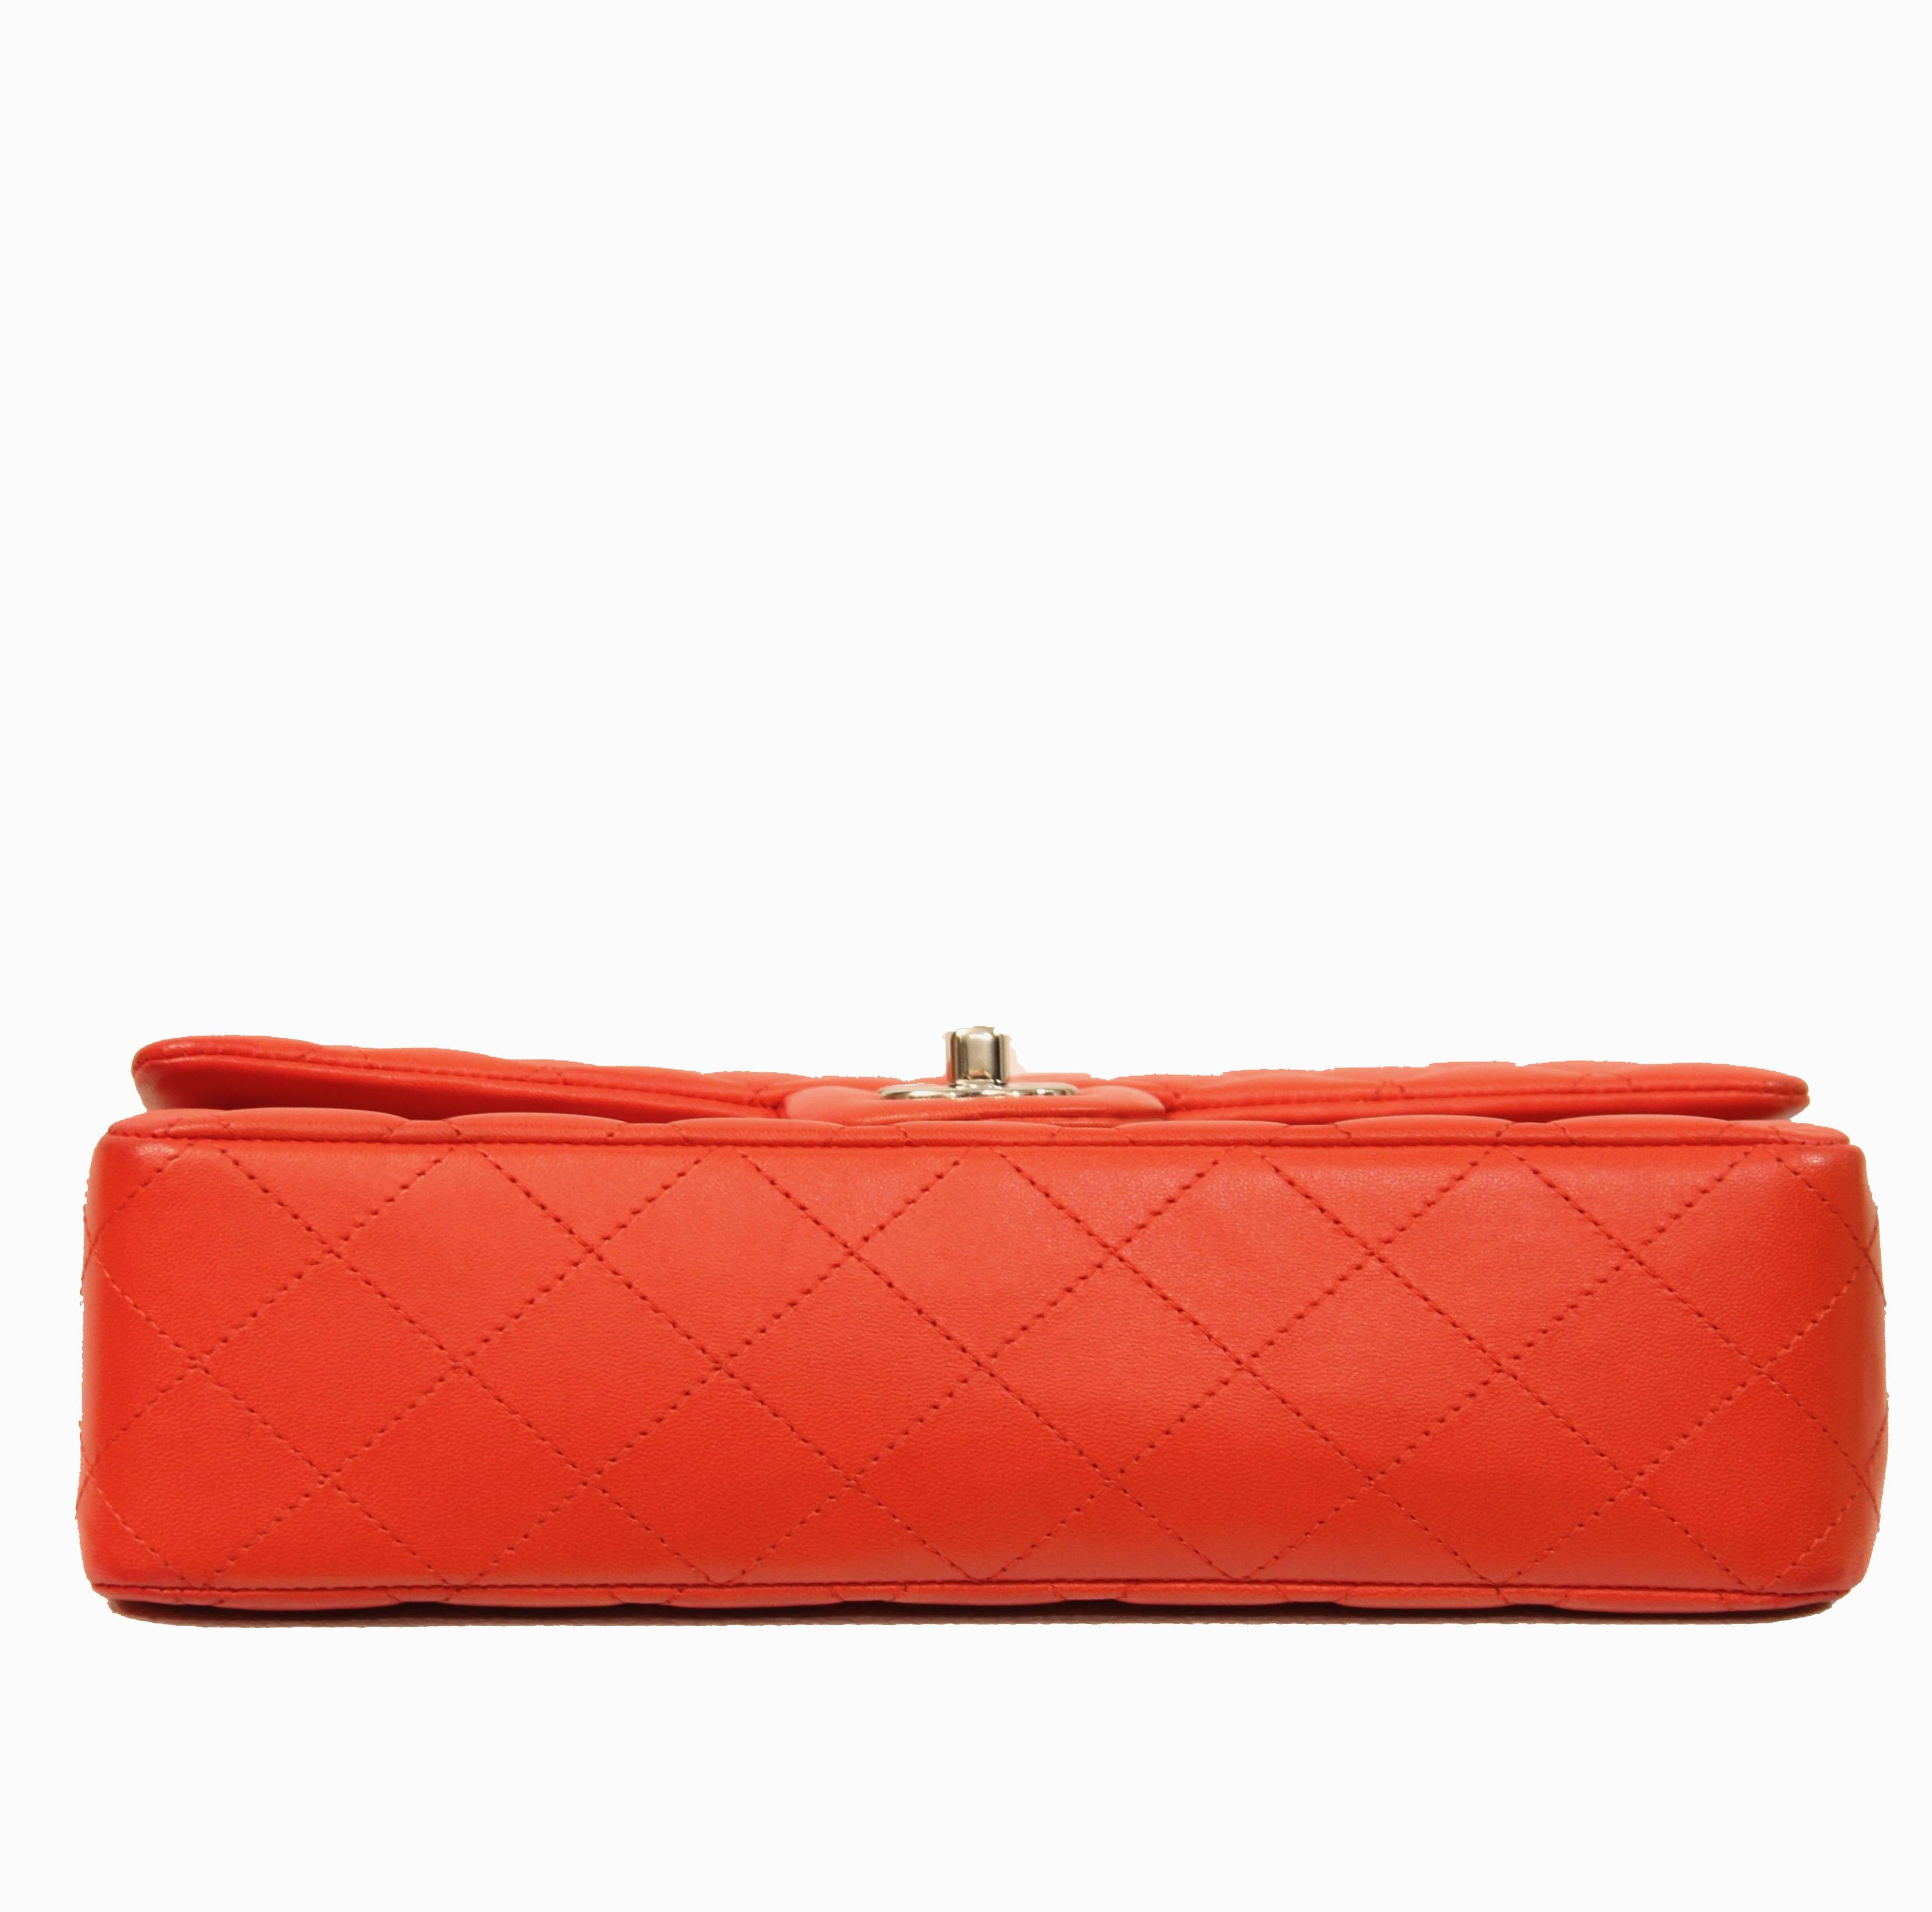 Chanel Classic Double Flap Red Lambskin Leather Bag 2